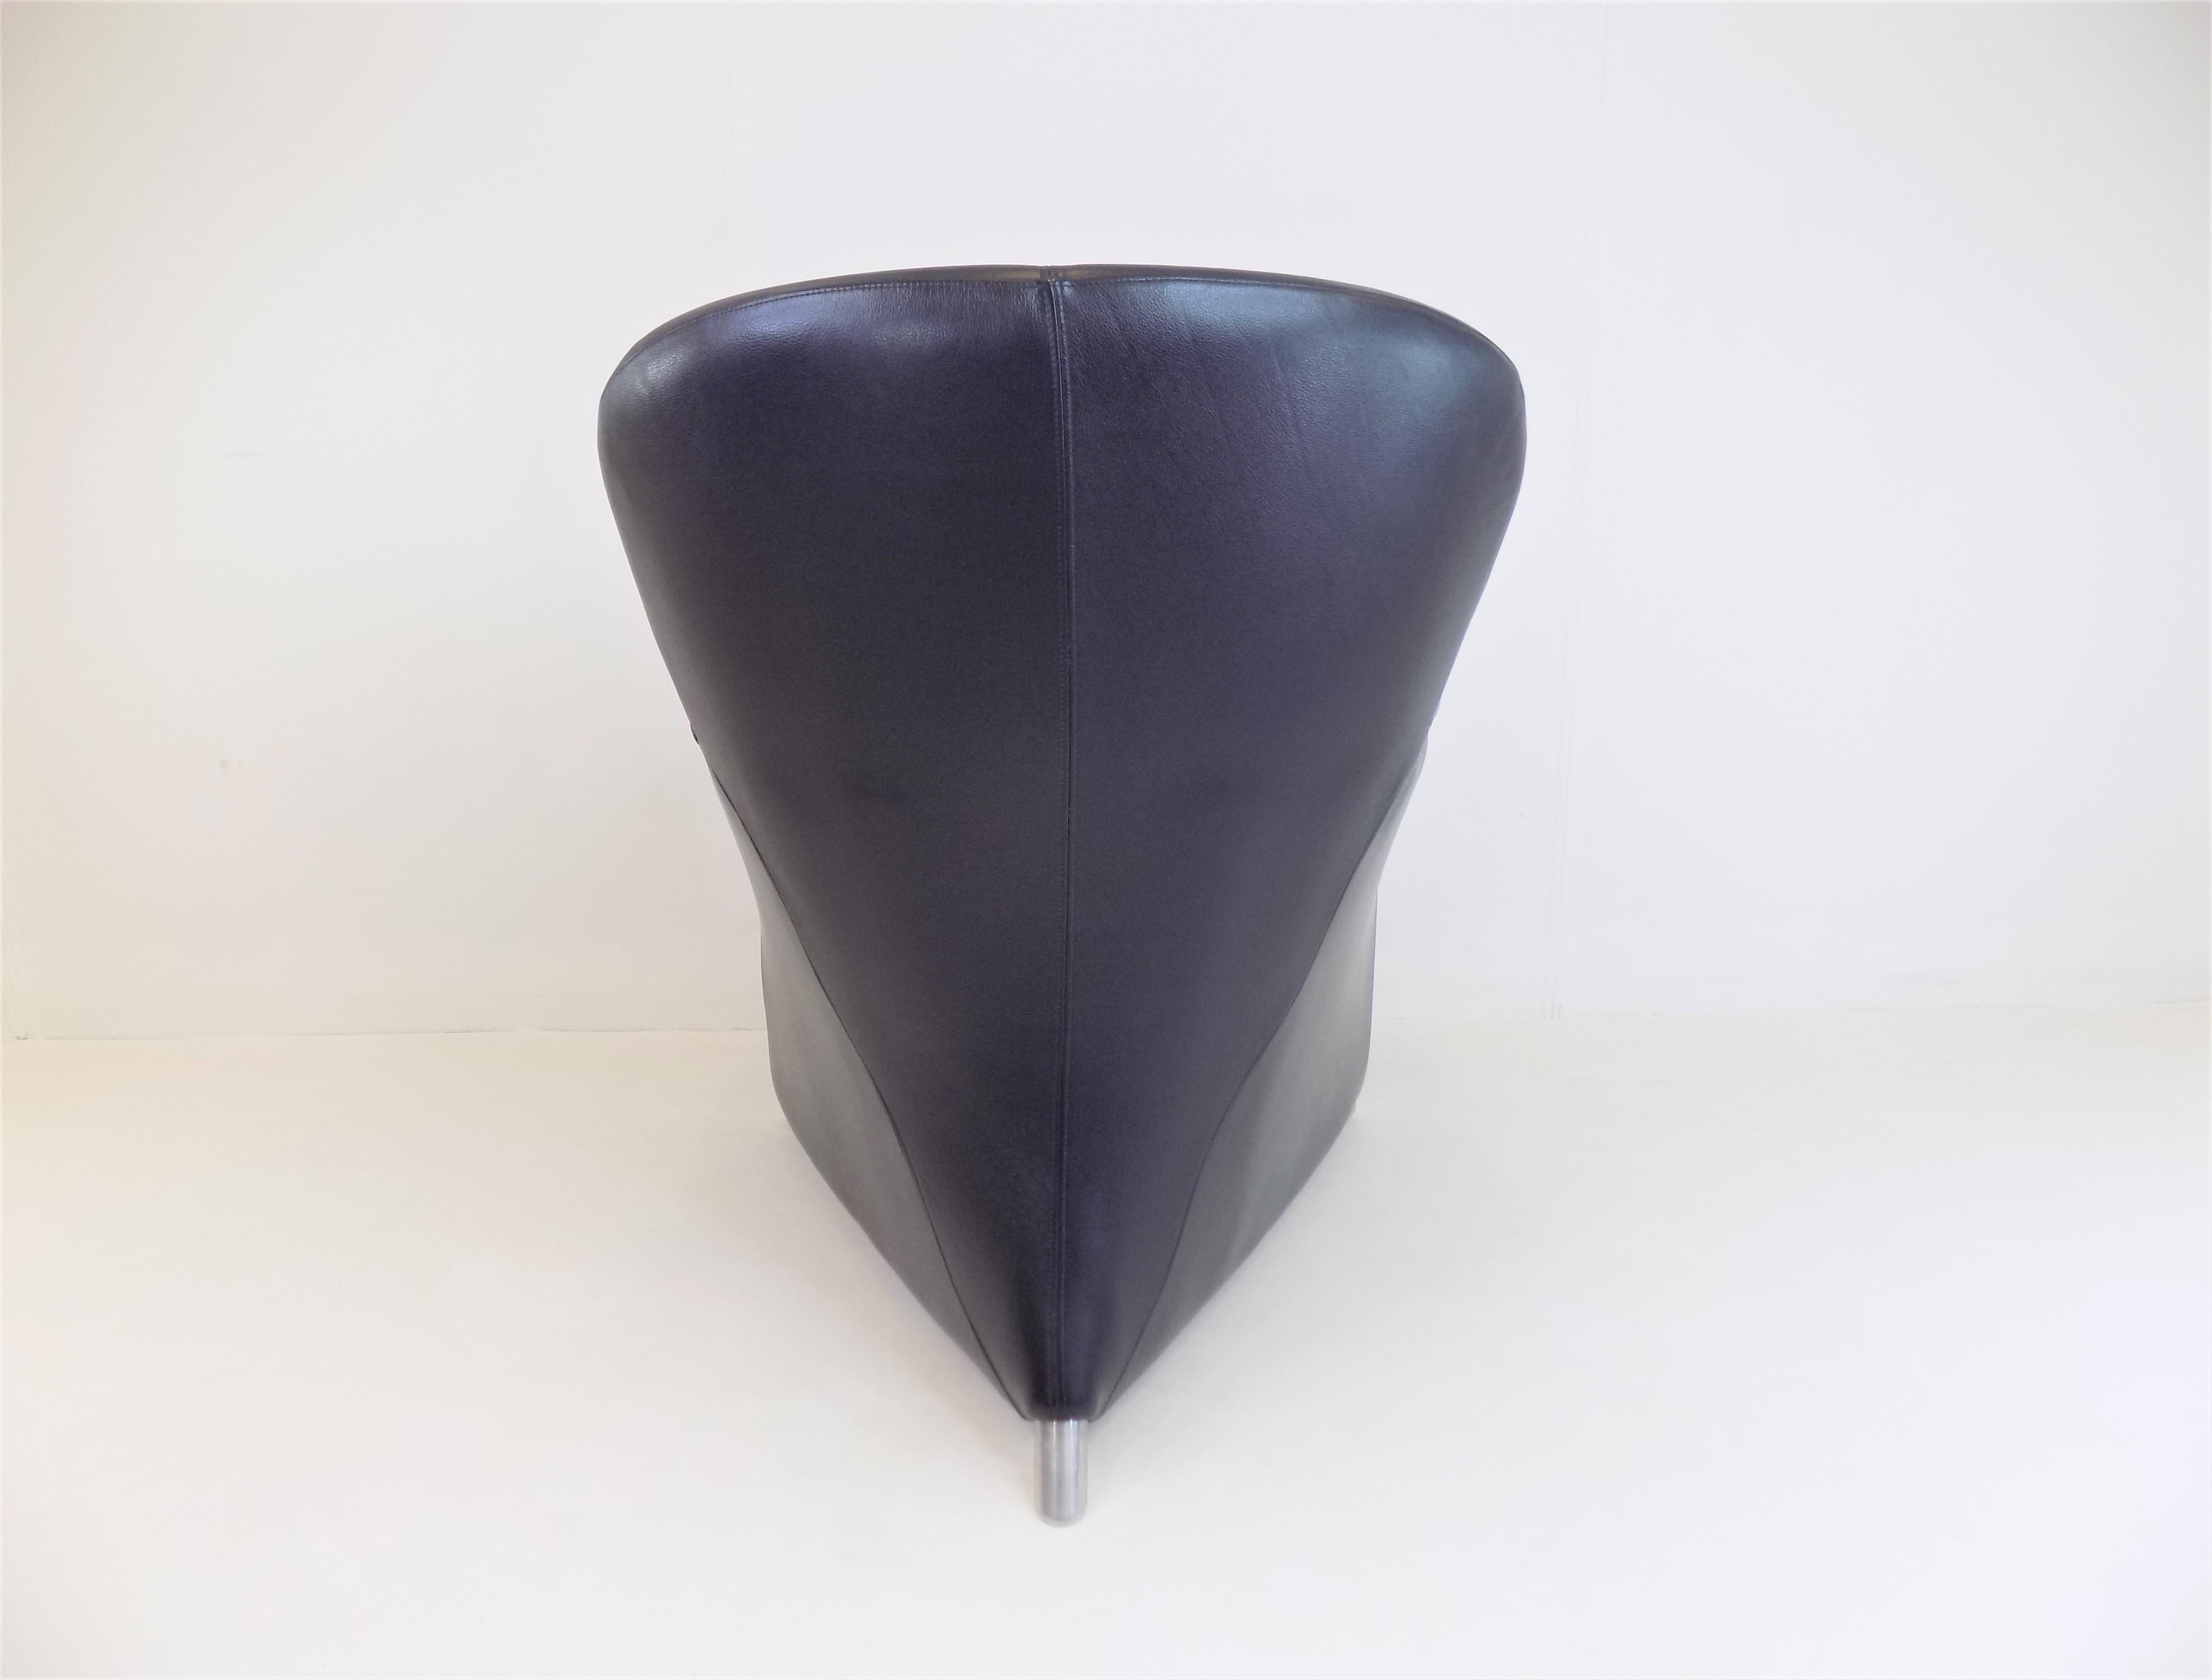 Leolux Excalibur leather armchair by Jan Armgardt 2